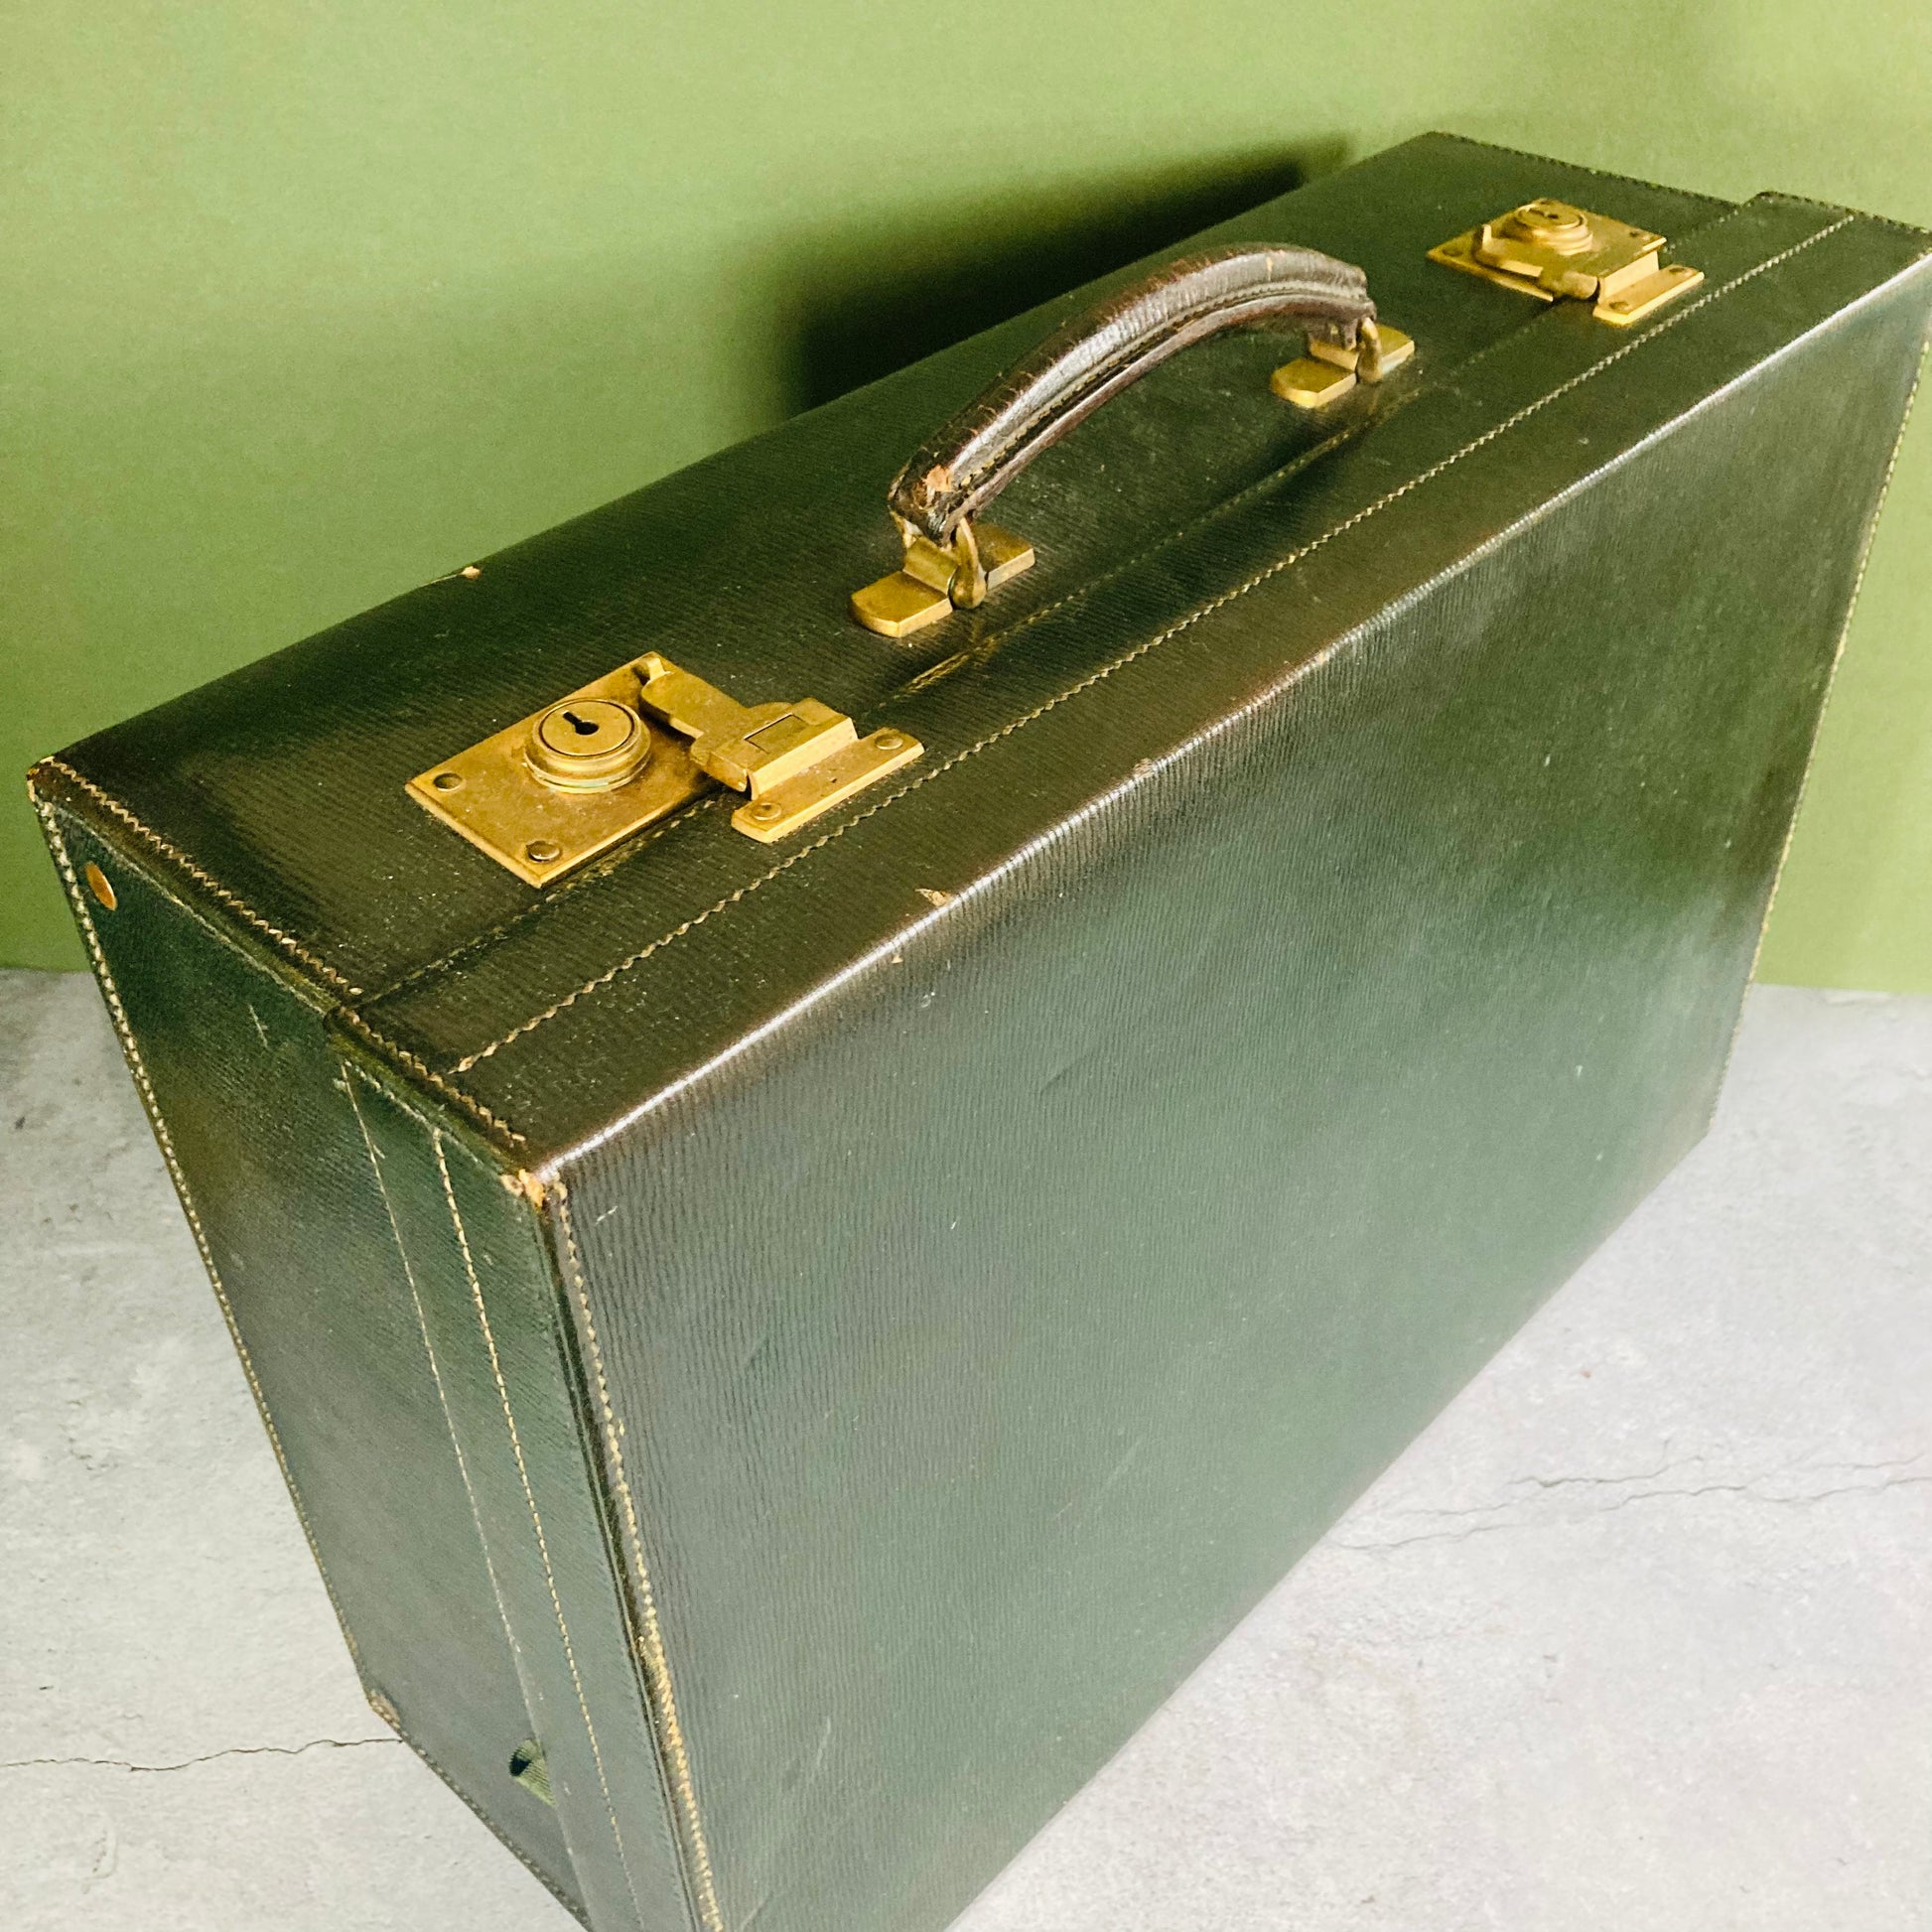 Luxury Antique Green Leather Travel Suitcase